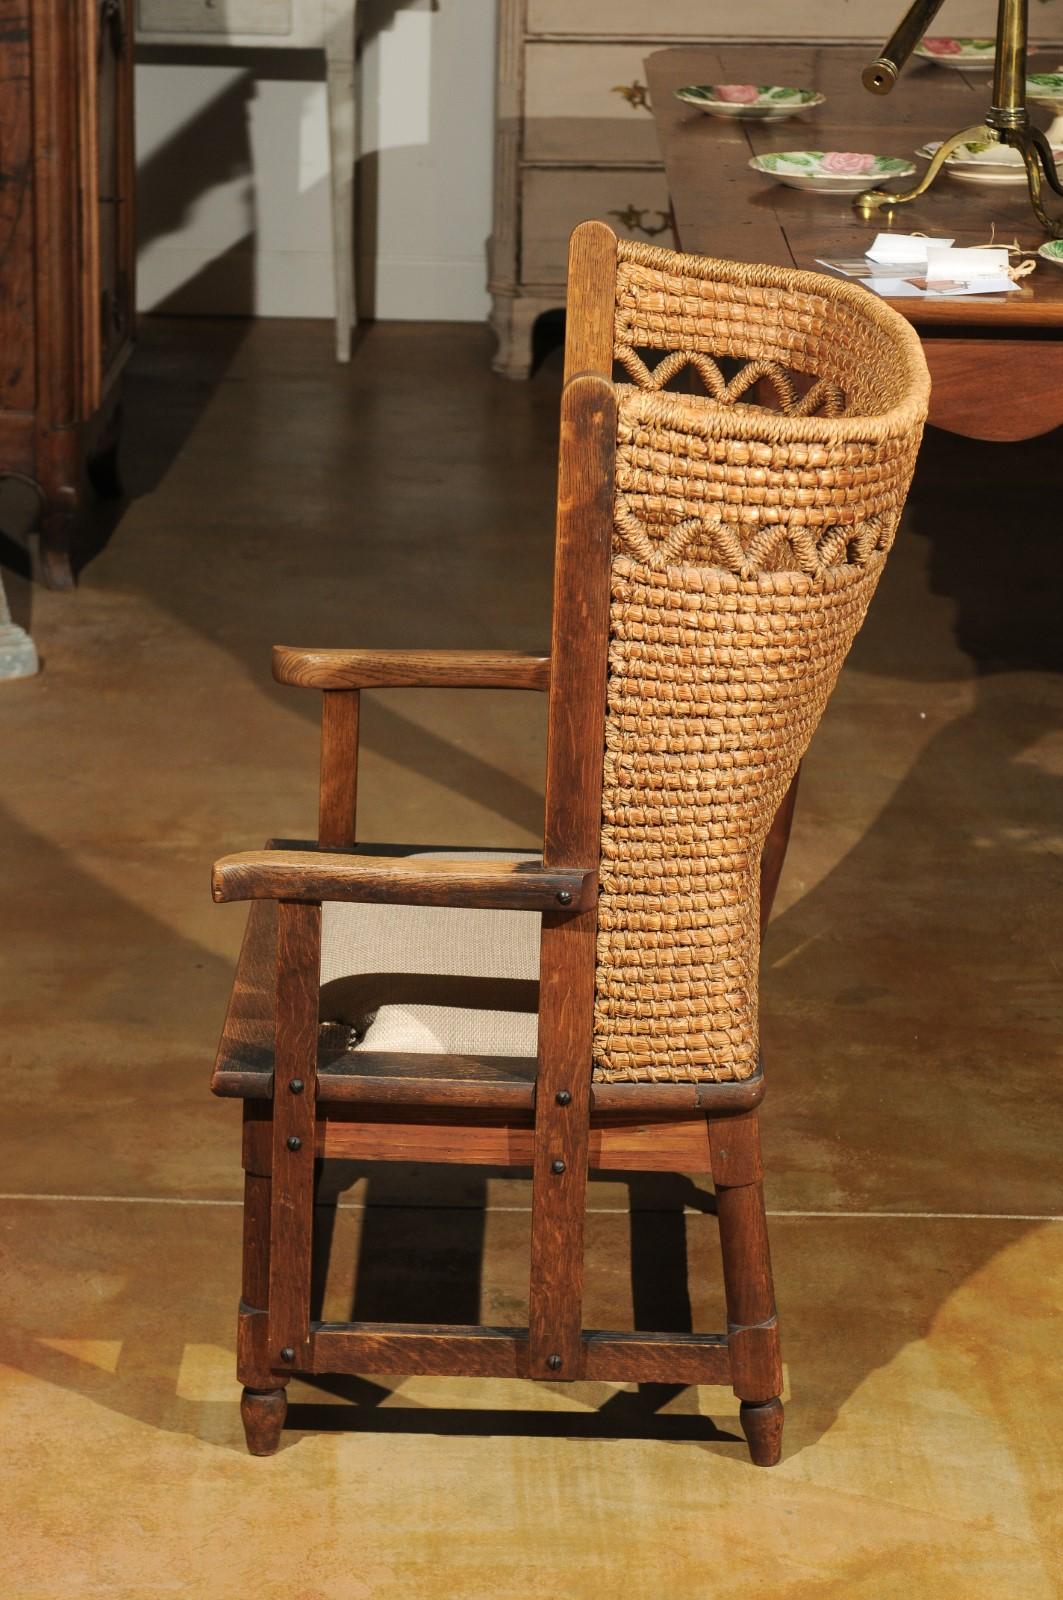 An authentic 19th century Orkney chair with zigzag-patterned handwoven straw back from the Island of Orkney near the Northern tip of Scotland and new woven upholstery. This armchair features a wooden armature supporting a curved back, reminiscent of